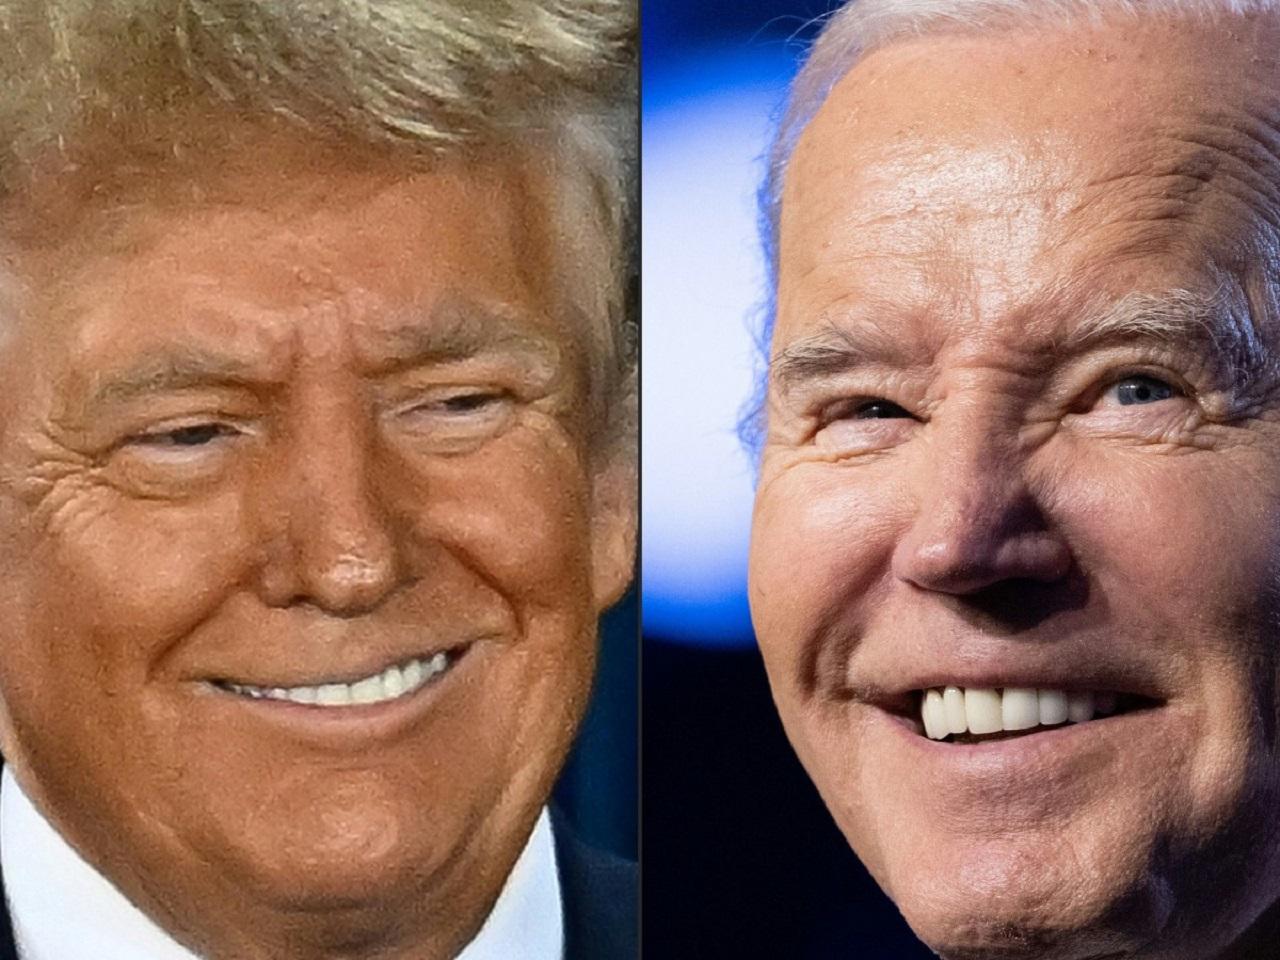 In Arizona, Haley surprisingly received 20 per cent of the votes. Trump with 76.2 per cent of the votes bagged all the 43 delegates at stake. Arizona is considered to be a battleground state. Now Trump has 1,623 delegates and Biden has 2,483 delegates